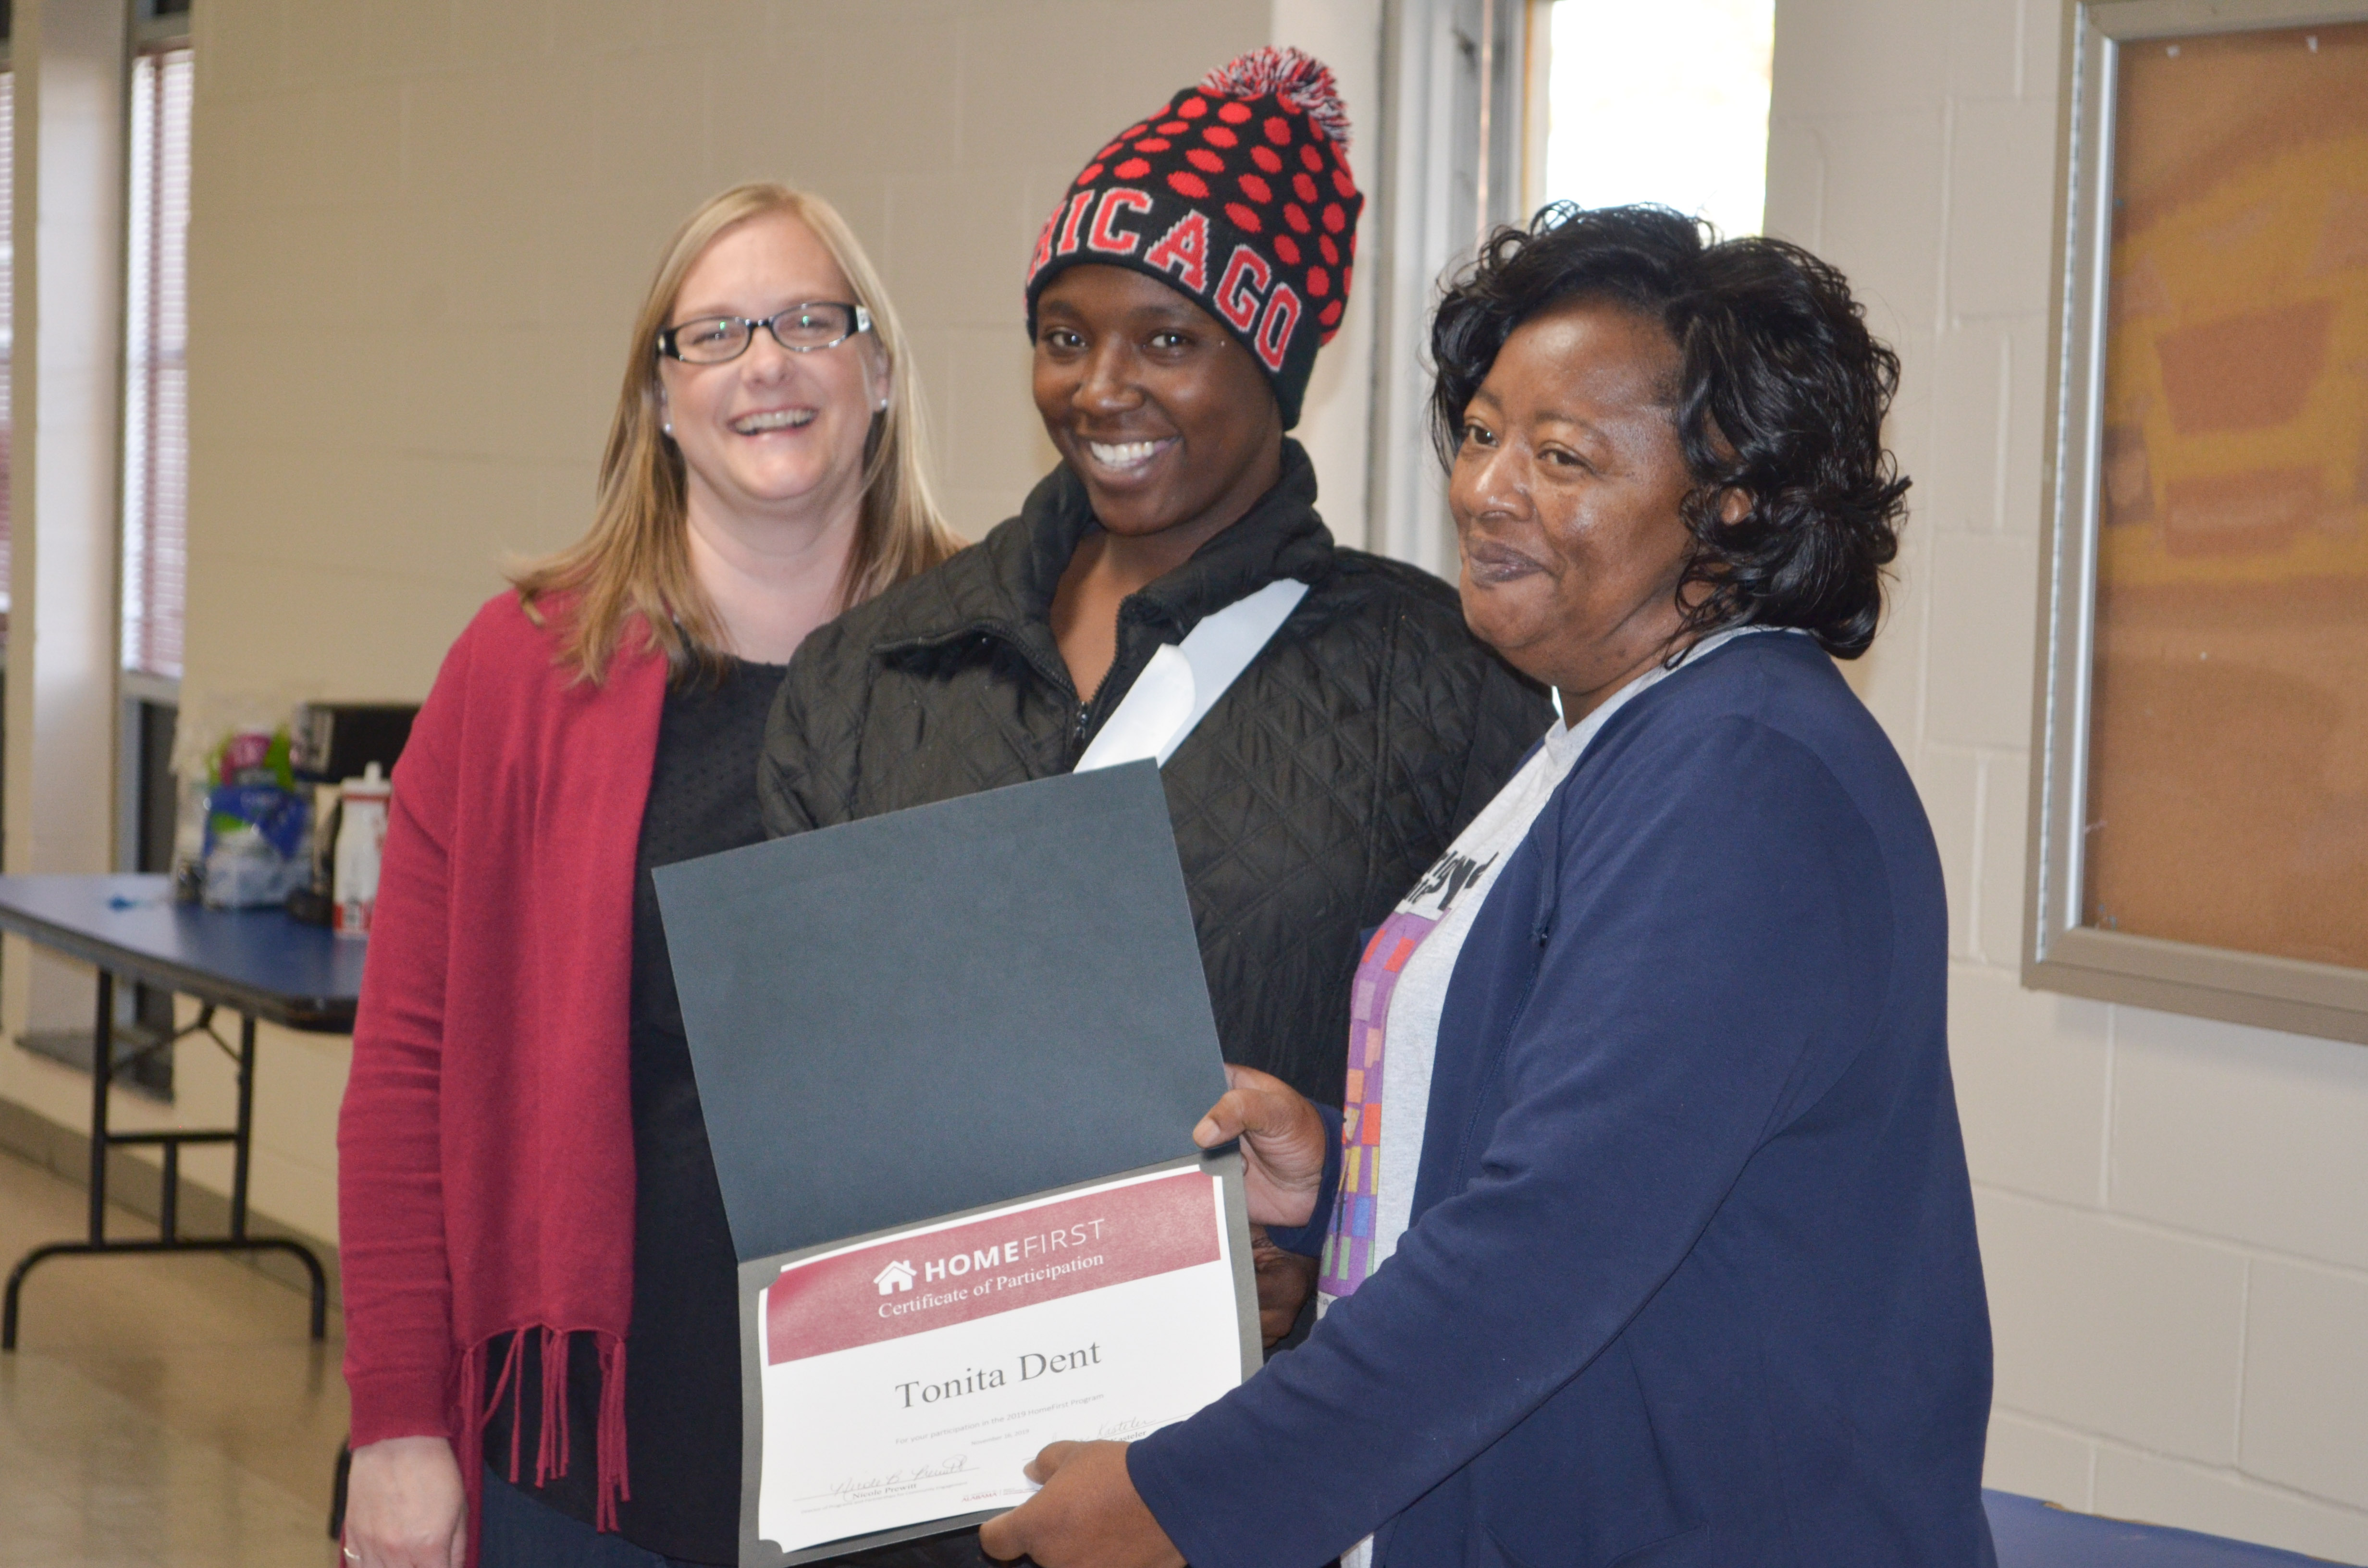 Anita Lewis, executive director of the Housing Authority of Greene County (right) and Susan Kasteler, HomeFirst program coordinator (left), present a certificate of participation to Tonita Dent.